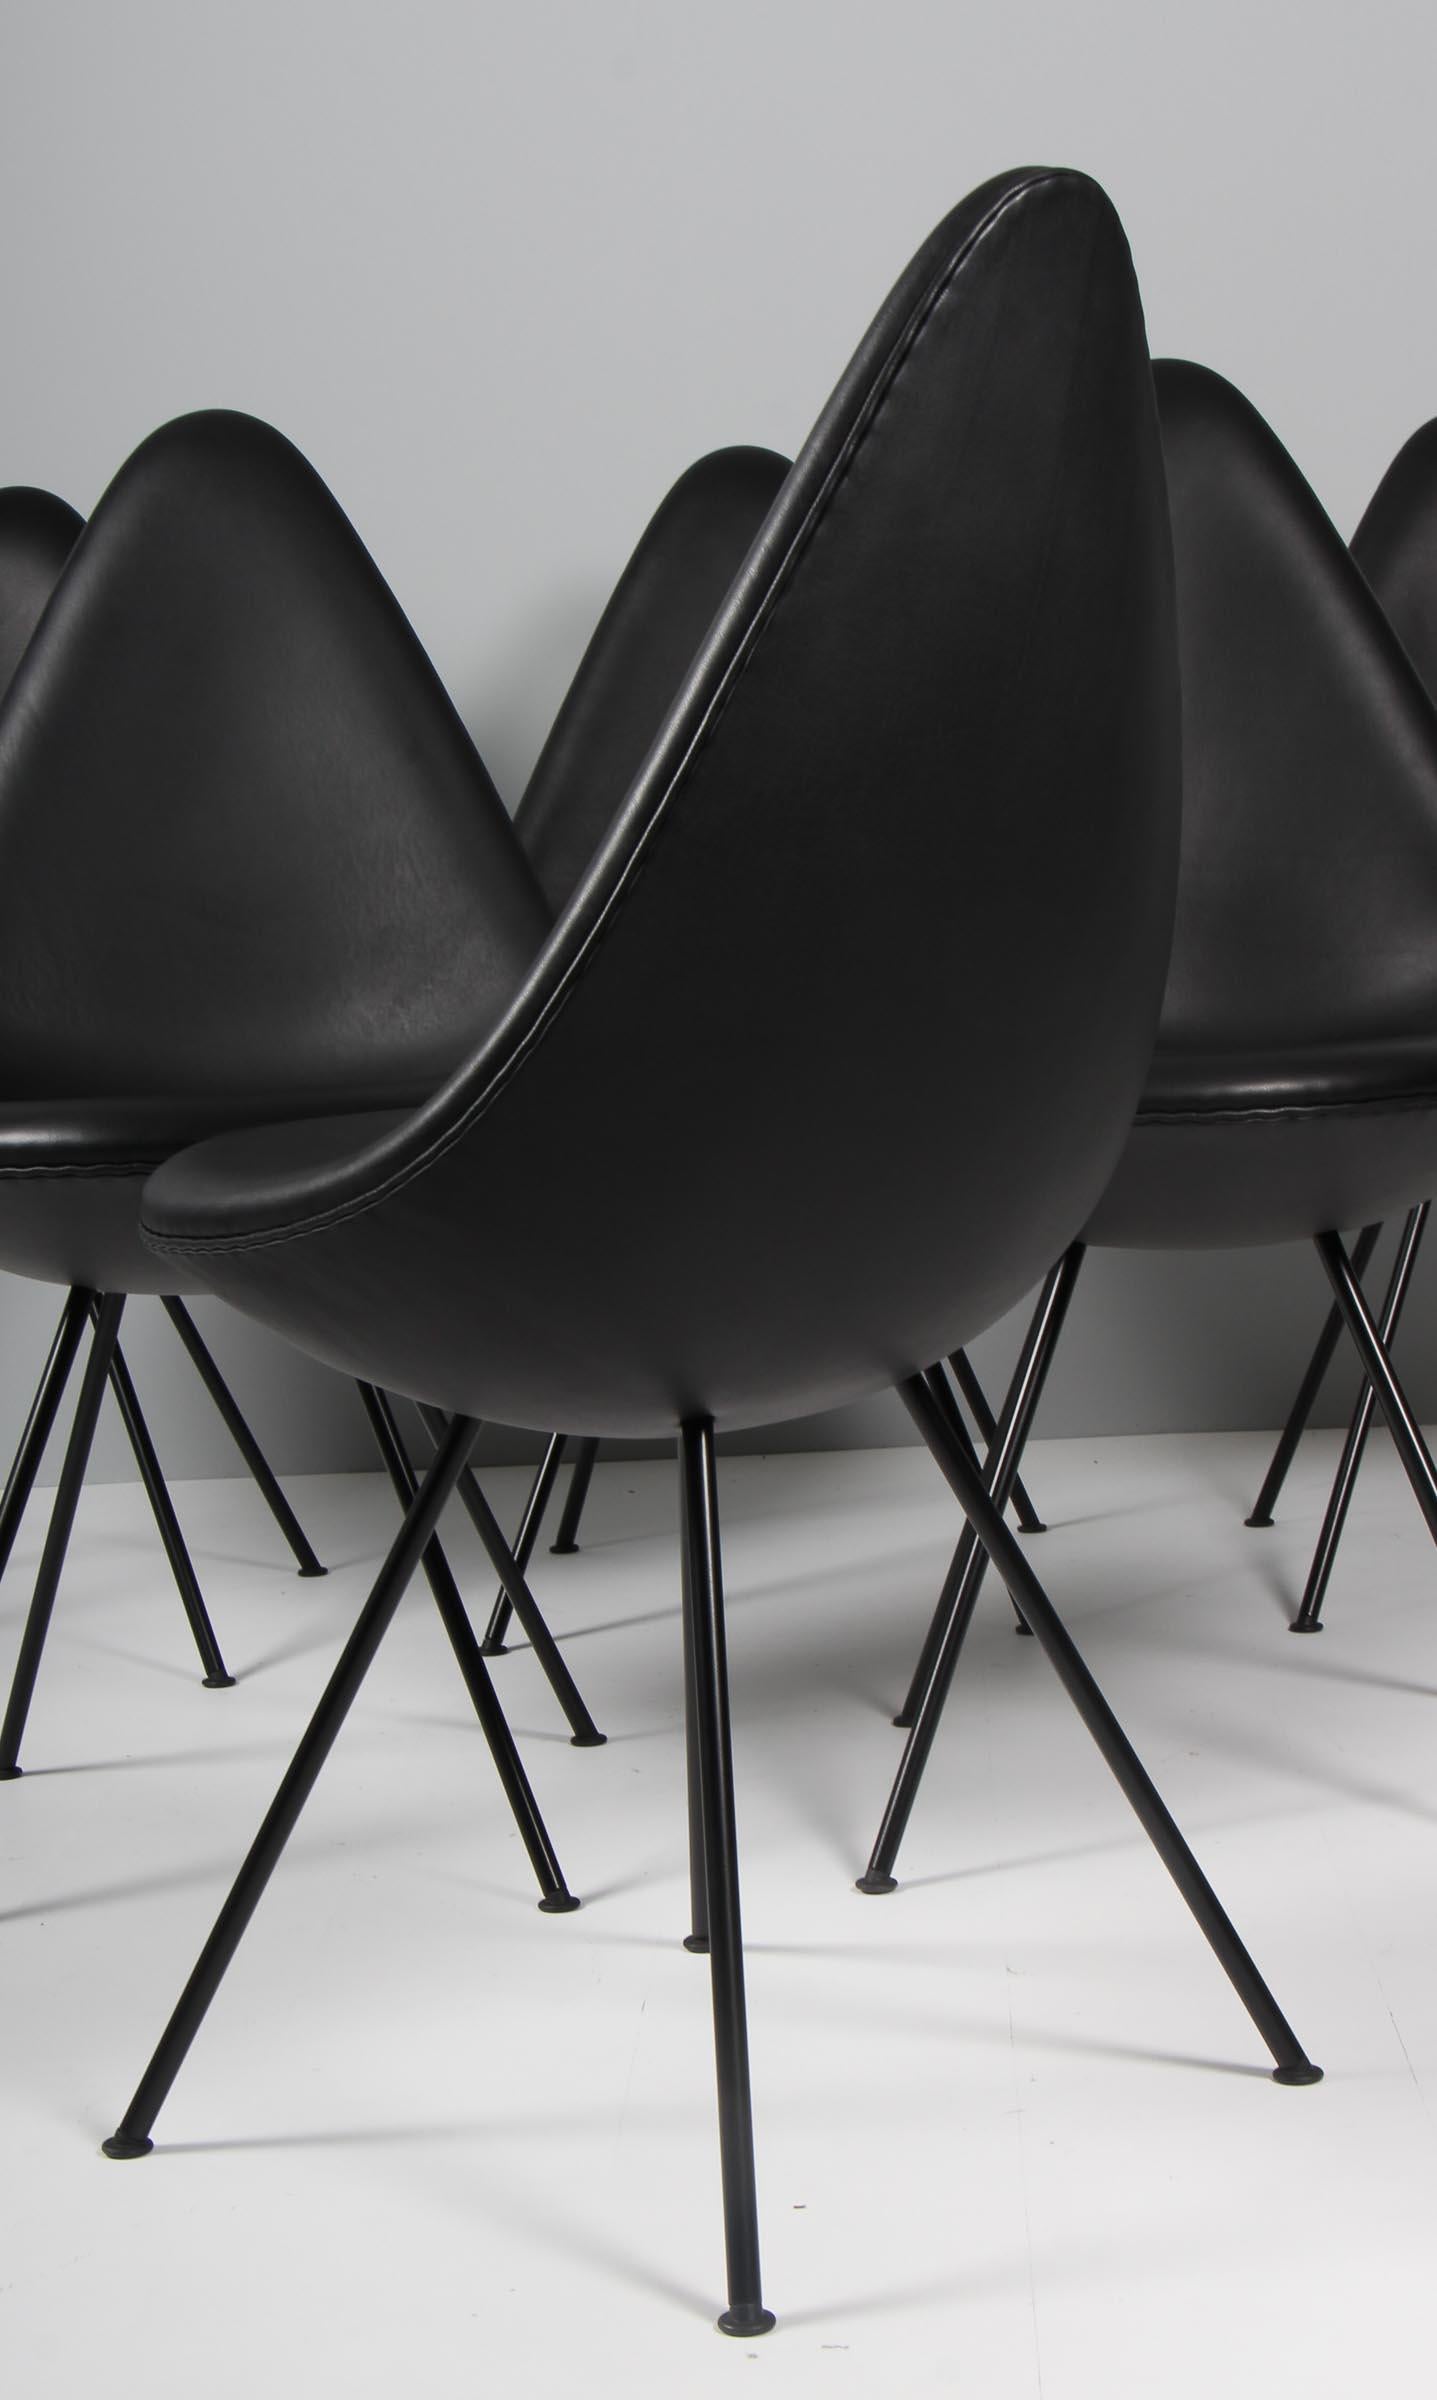 Arne Jacobsen, Dining Chair Model 3110, Drop Chair, Black Aniline Leather In Excellent Condition For Sale In Esbjerg, DK